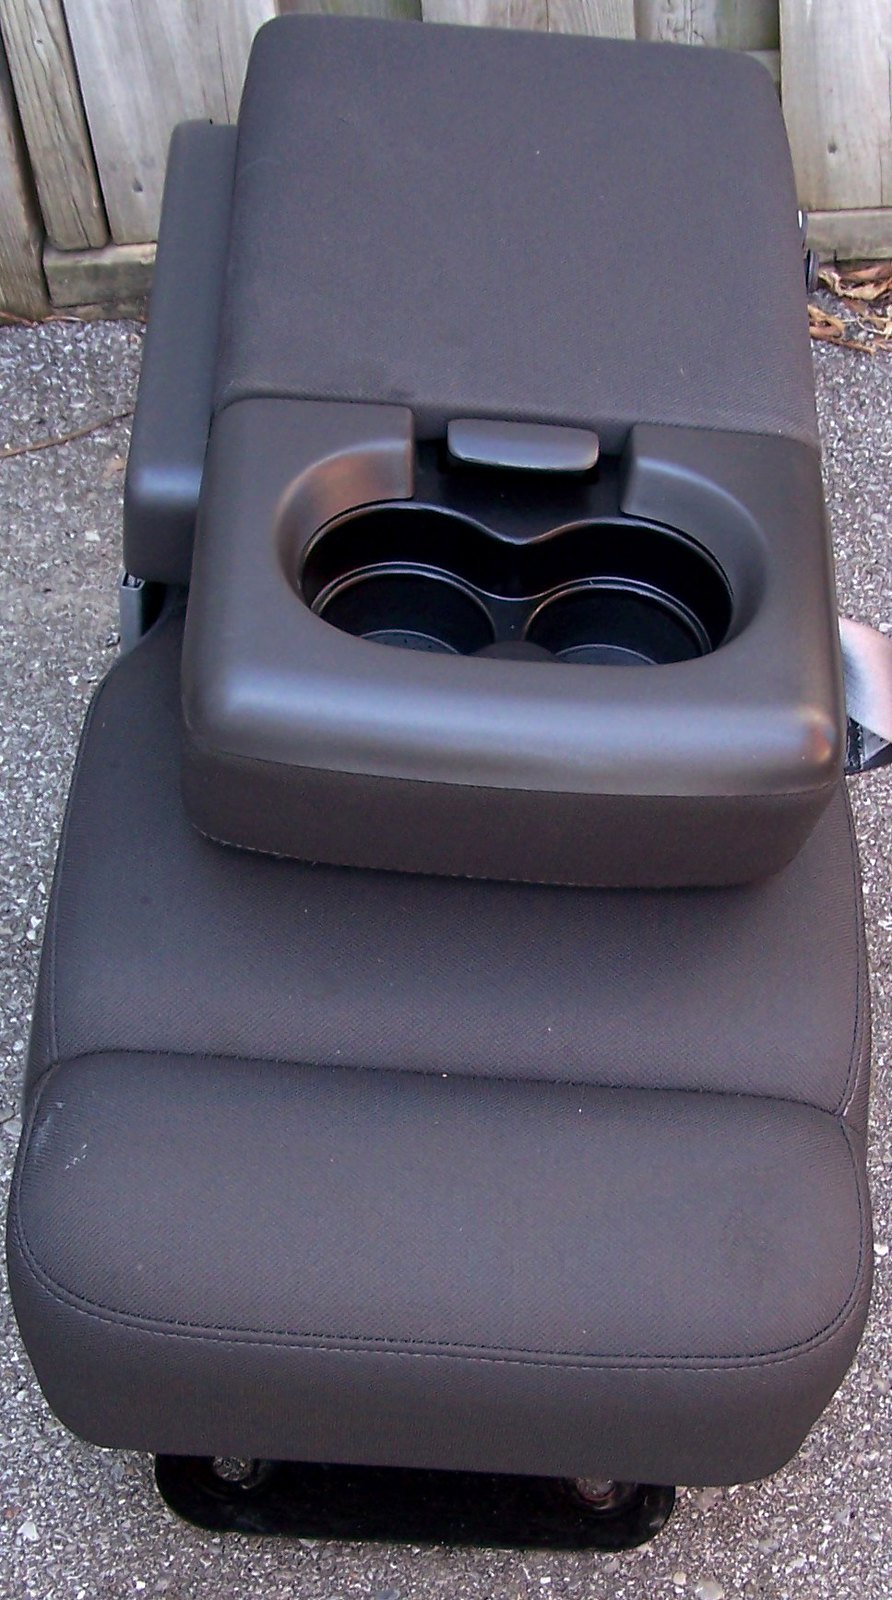 06 FORD F150 JUMP SEAT FOLD DOWN CENTER CONSOLE | Flickr 2006 Ford F150 Back Seat Fold Down